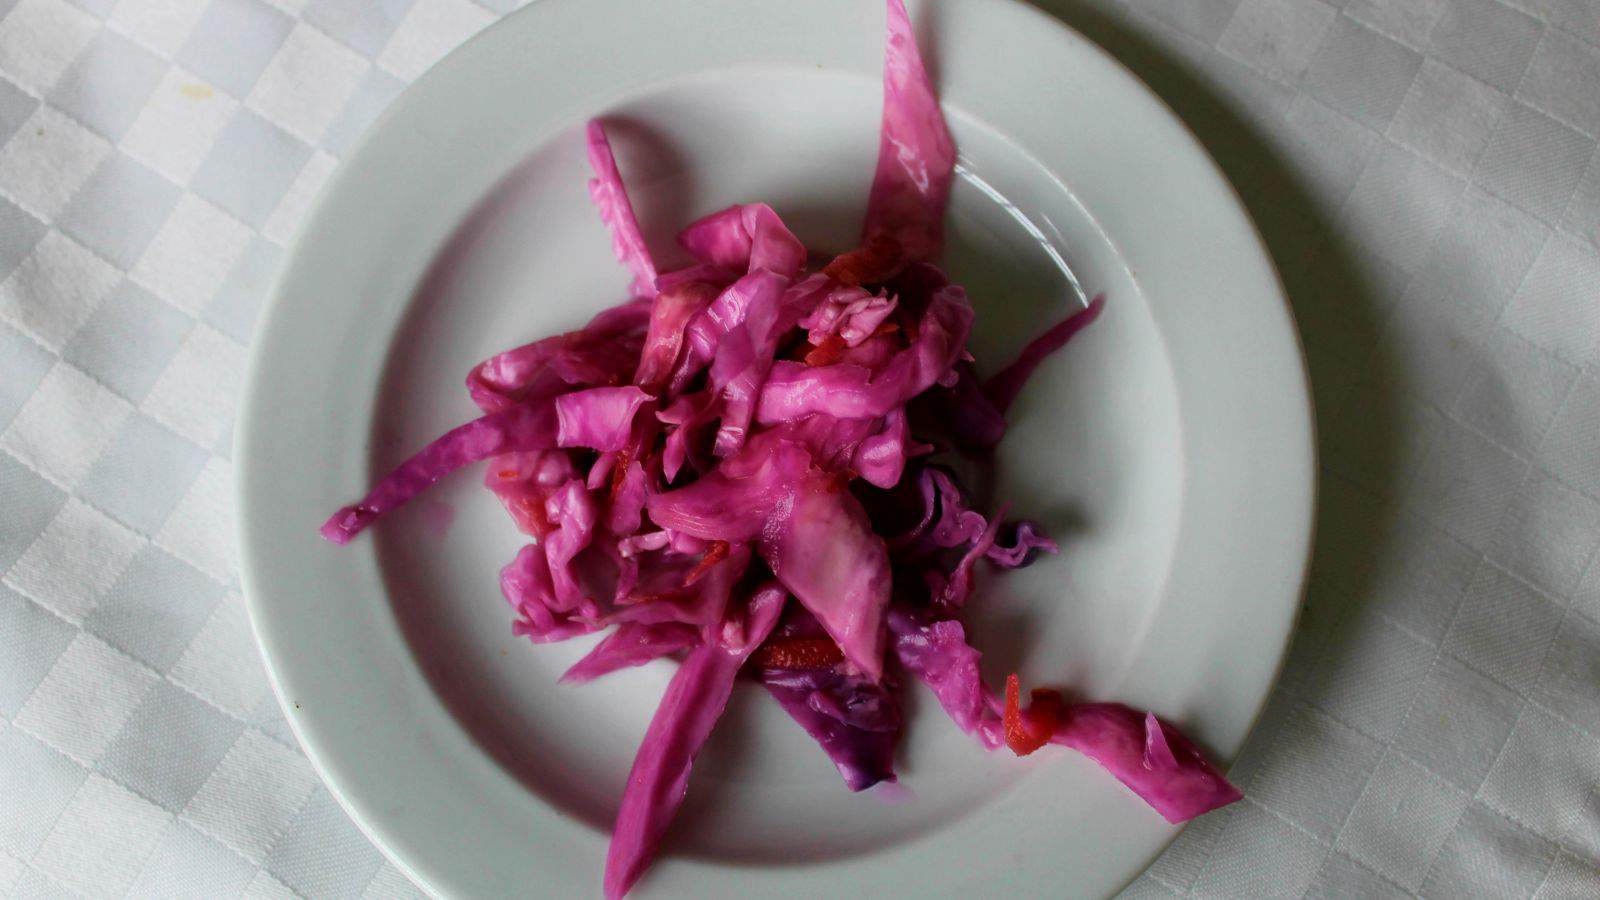 Red cabbage on a white plate.